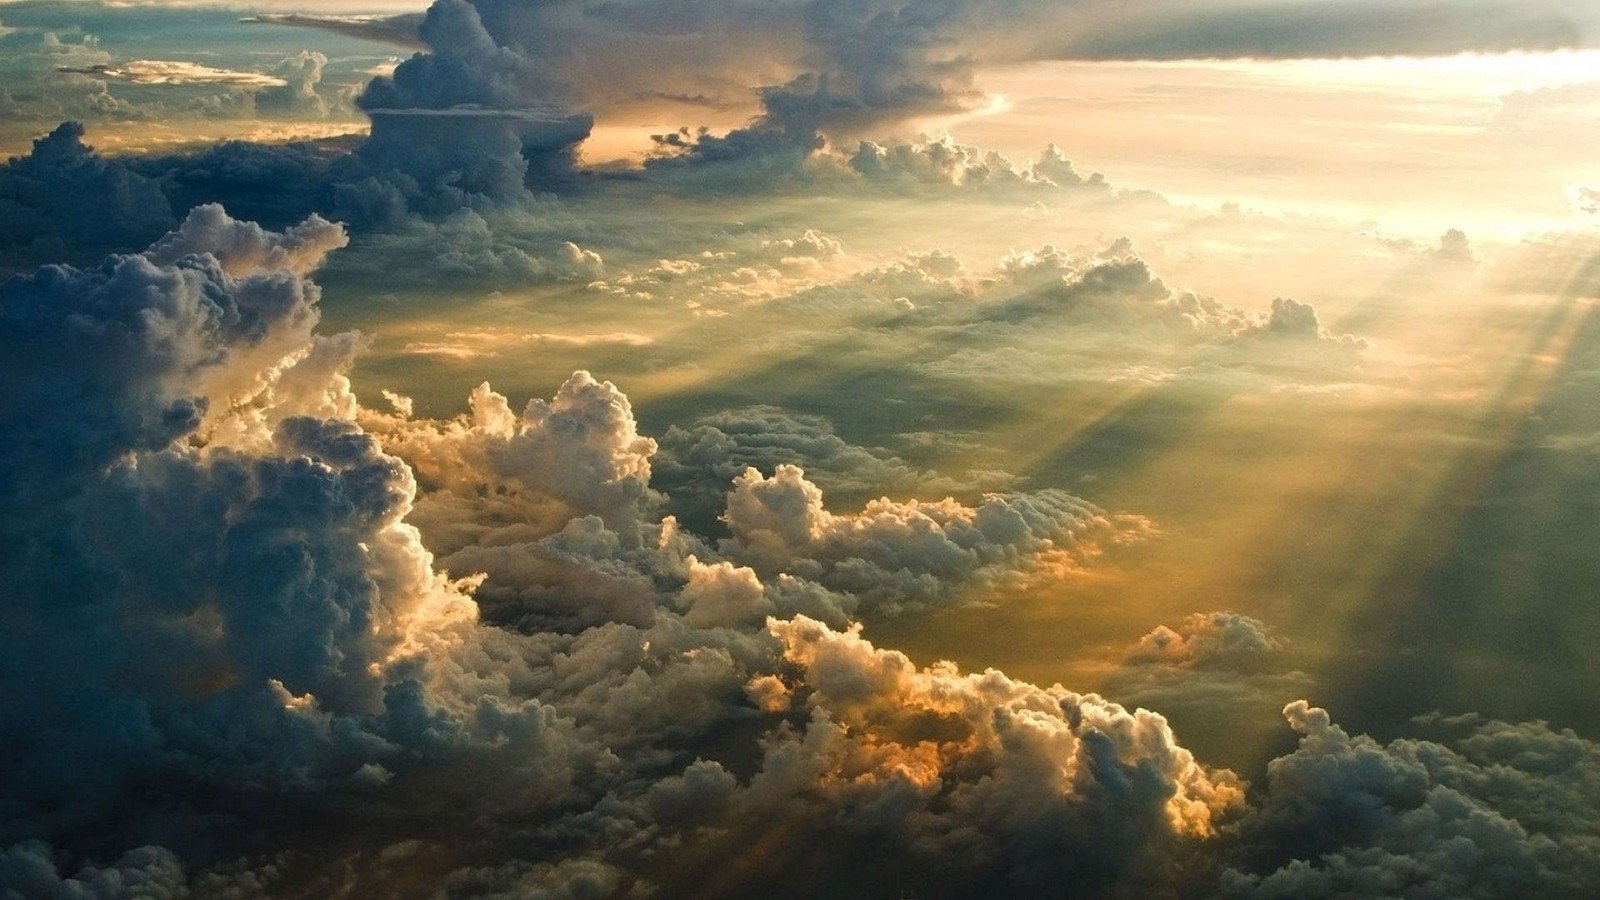 mist, Nature, Landscape, Clouds, Sun, Rays, Sunset, Sunlight, Aerial, View, Divinity Wallpaper